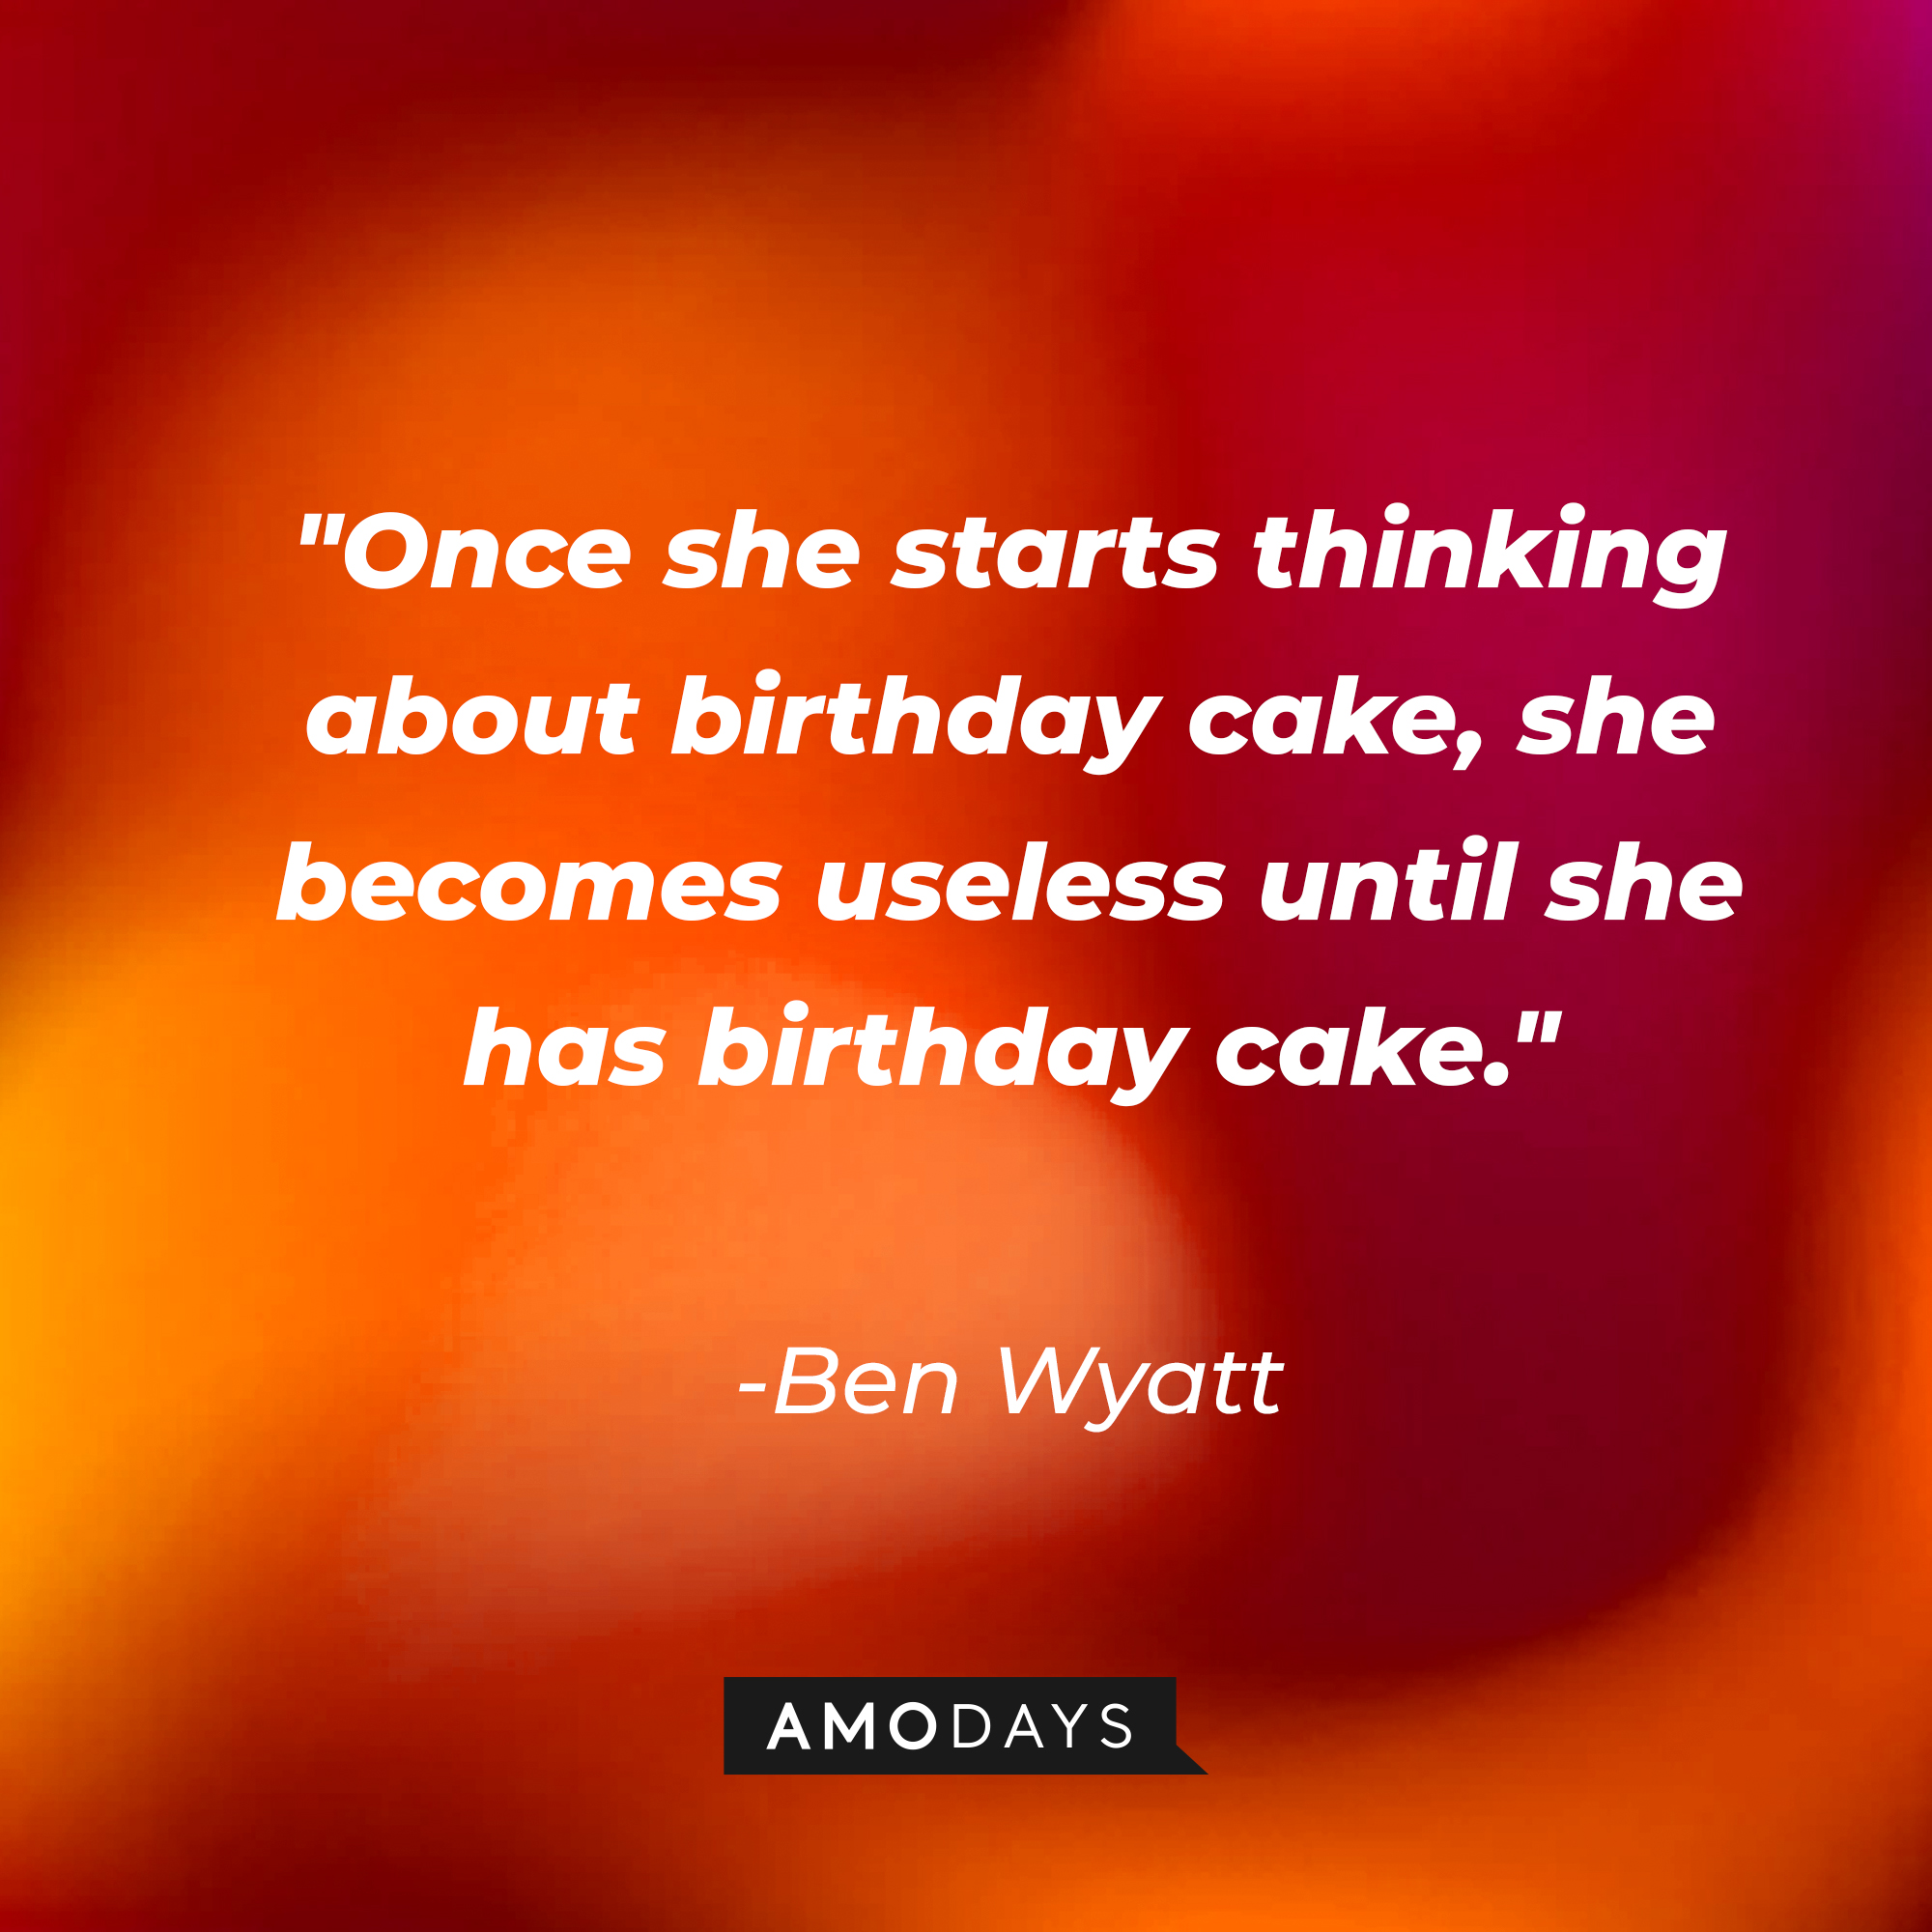 Ben Wyatt's quote: "Once she starts thinking about birthday cake, she becomes useless until she has birthday cake." | Source: AmoDays